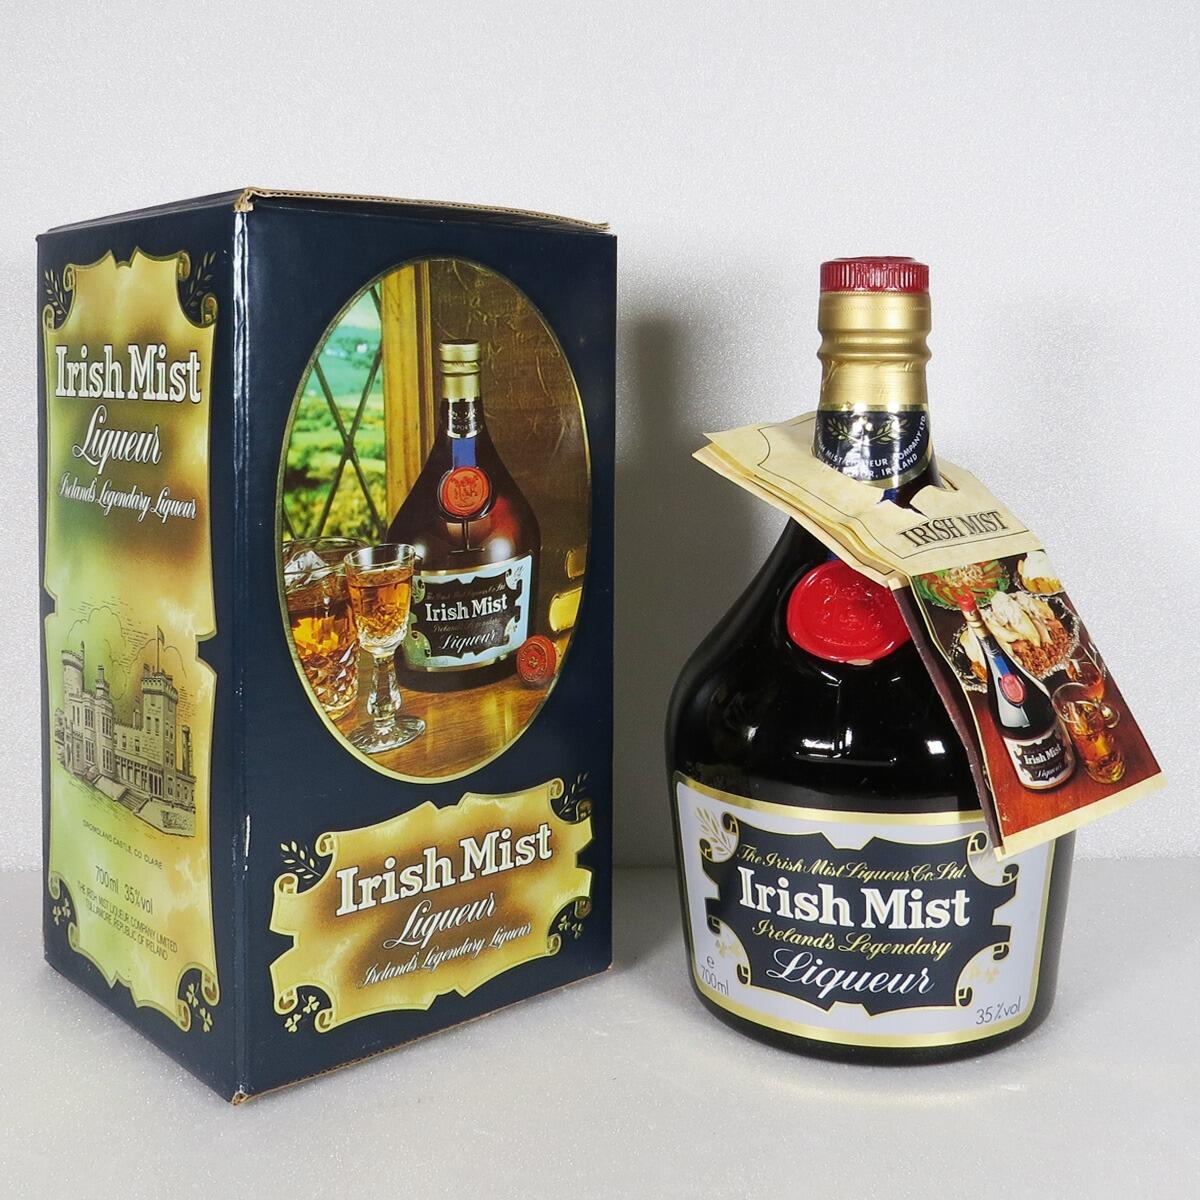 Irish Mist Whisky Liqueur from 1980s-90s (70cl, 35%)